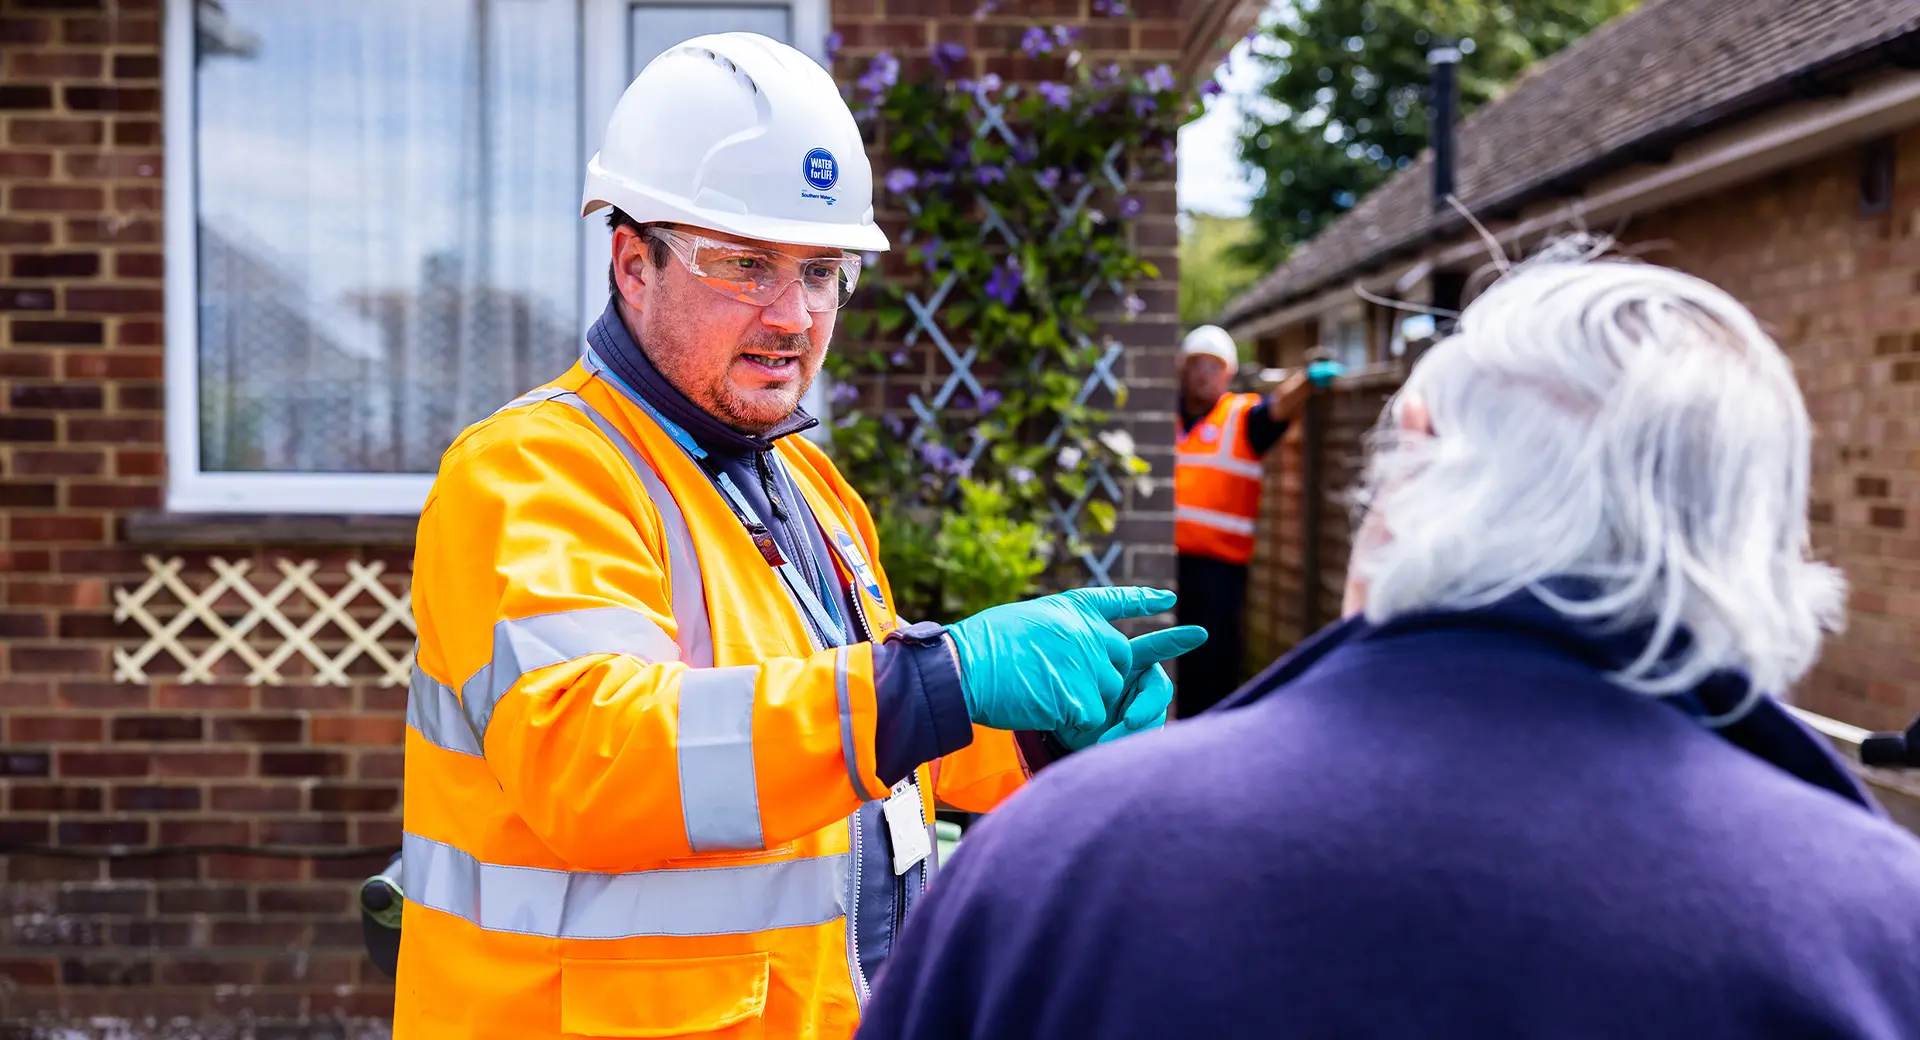 A Southern Water engineer talks to a customer in their garden with another employee visible in the background